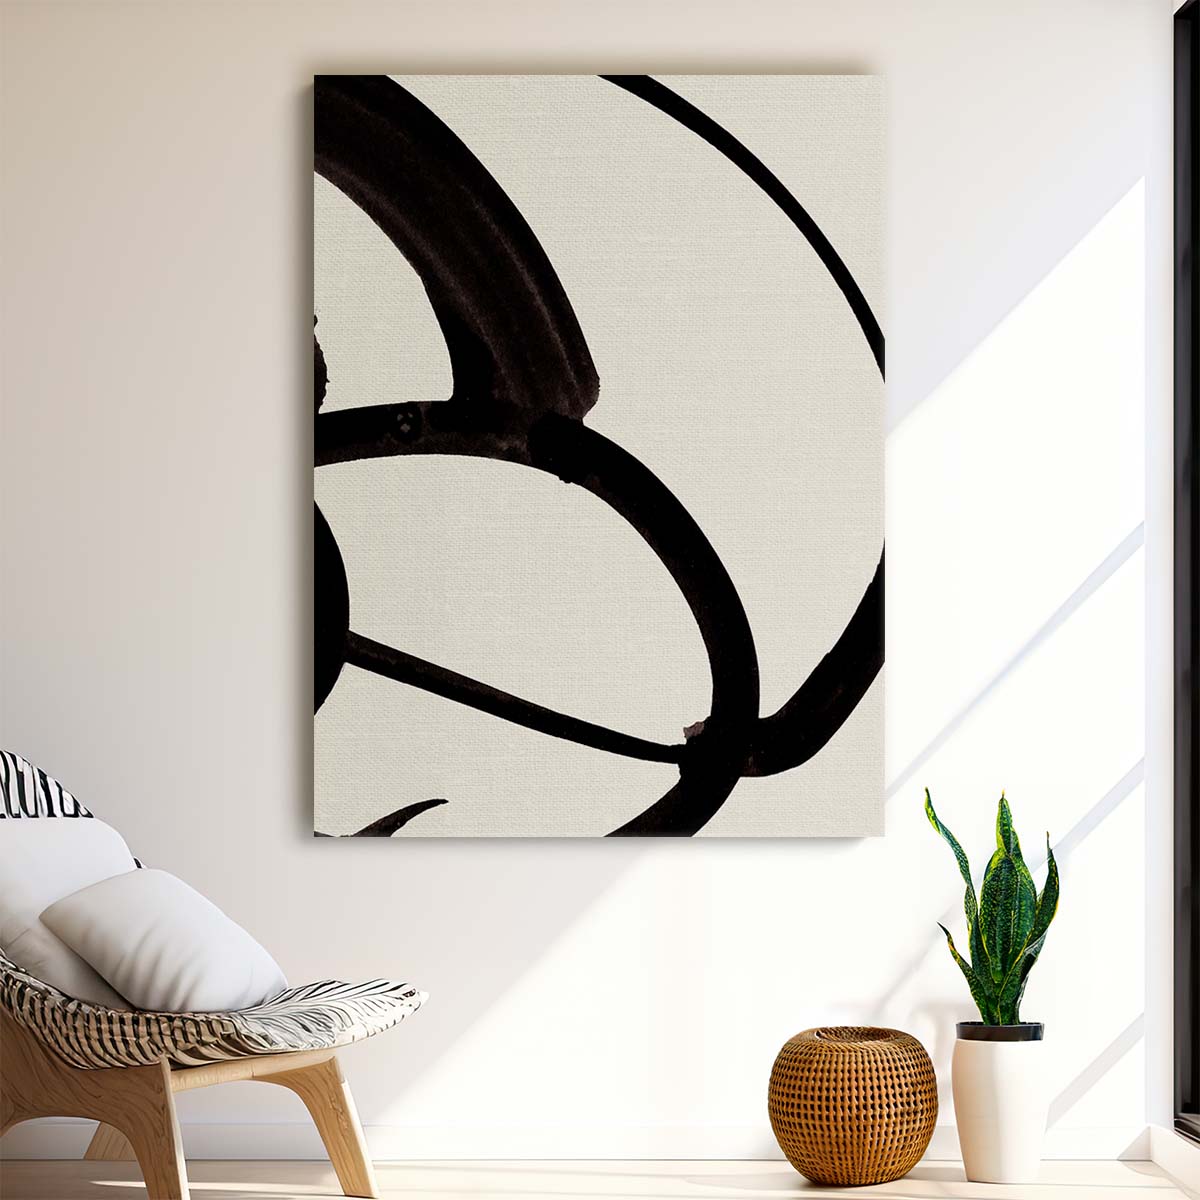 Dan Hobday's Minimalistic Abstract Geometric Illustration Atienne No2 by Luxuriance Designs, made in USA